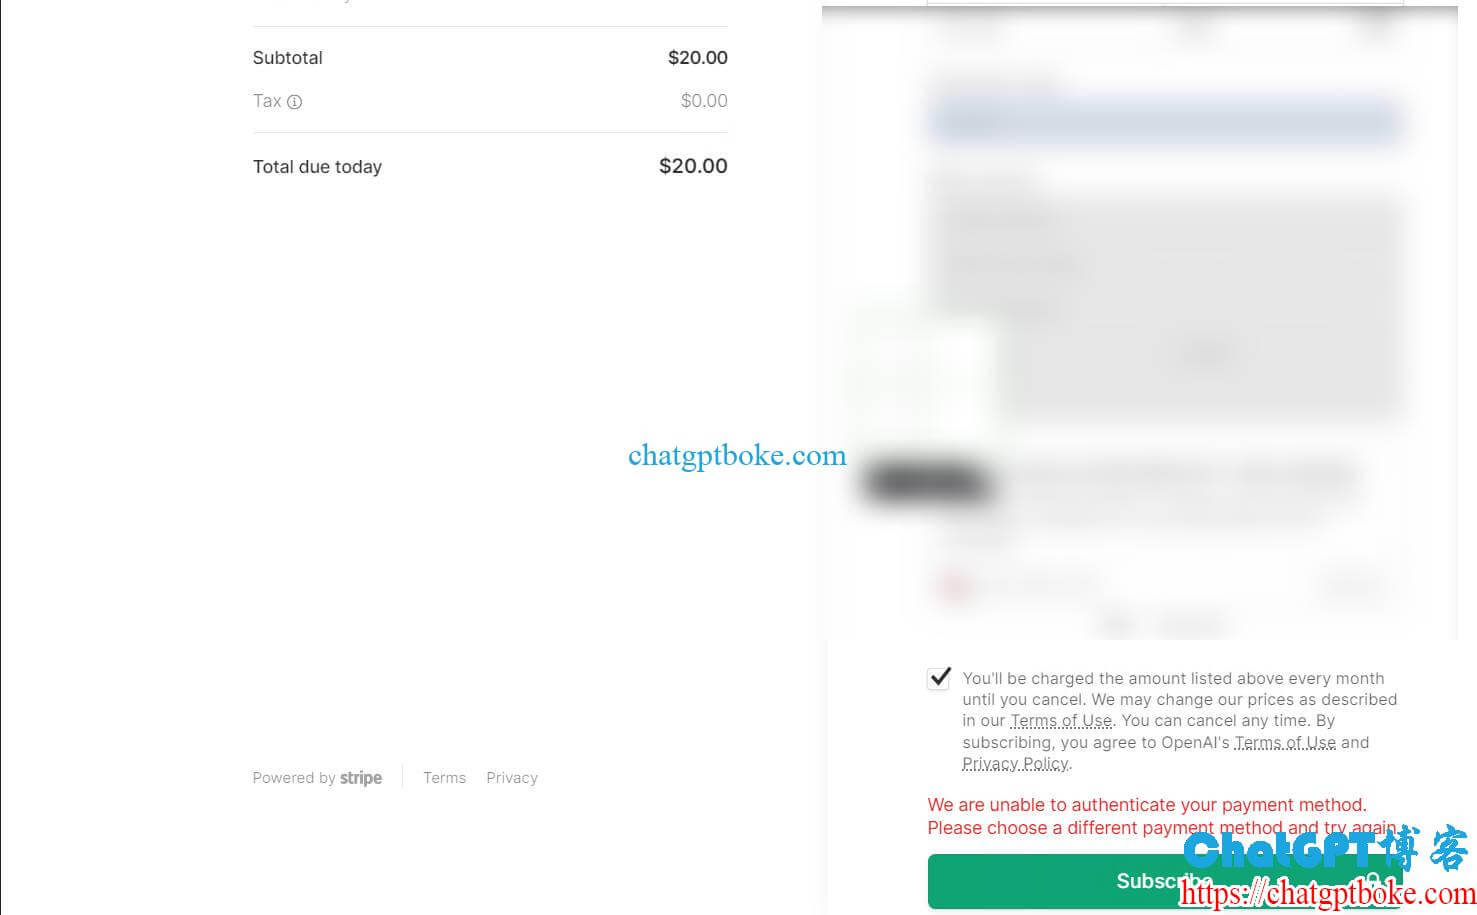 ChatGPT unable to authenticate your payment method